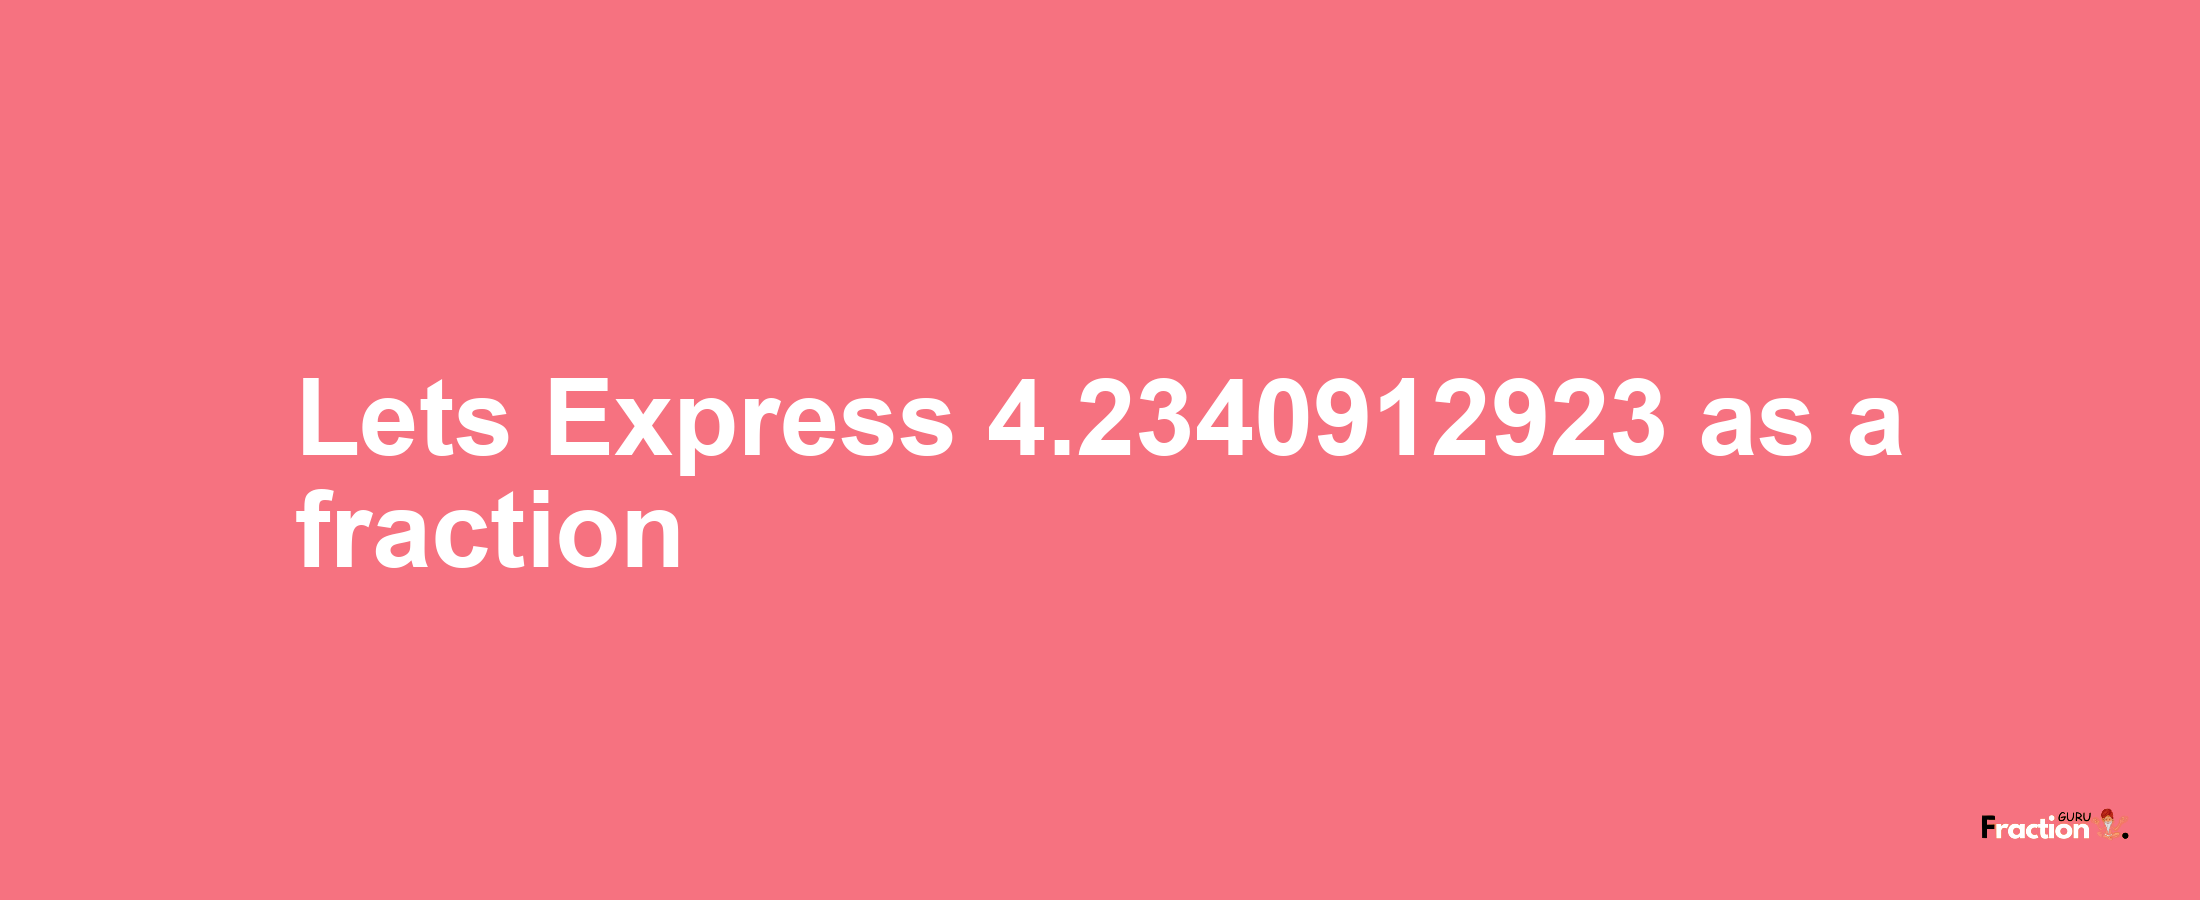 Lets Express 4.2340912923 as afraction